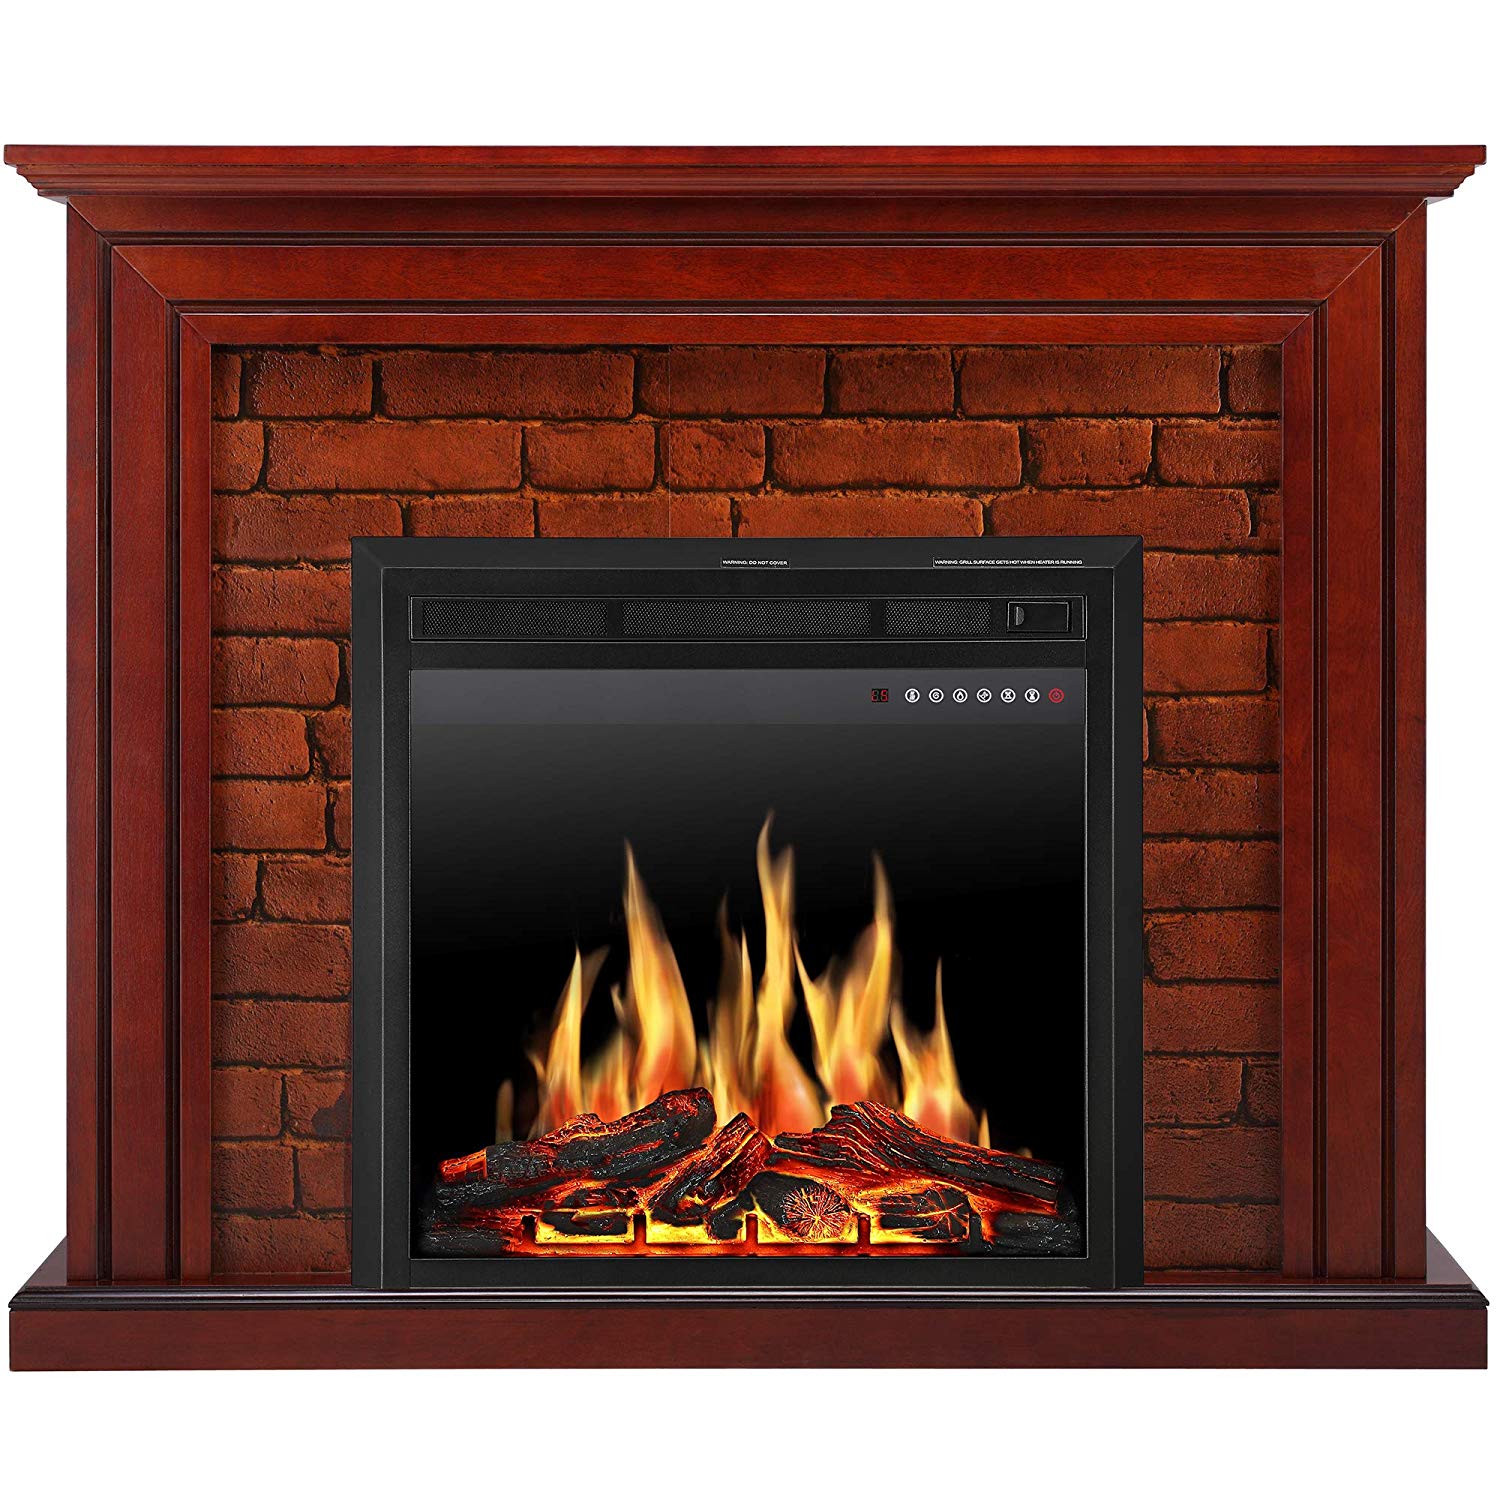 Birch Gas Fireplace Logs Best Of Jamfly Electric Fireplace Mantel Package Traditional Brick Wall Design Heater with Remote Control and Led touch Screen Home Accent Furnishings